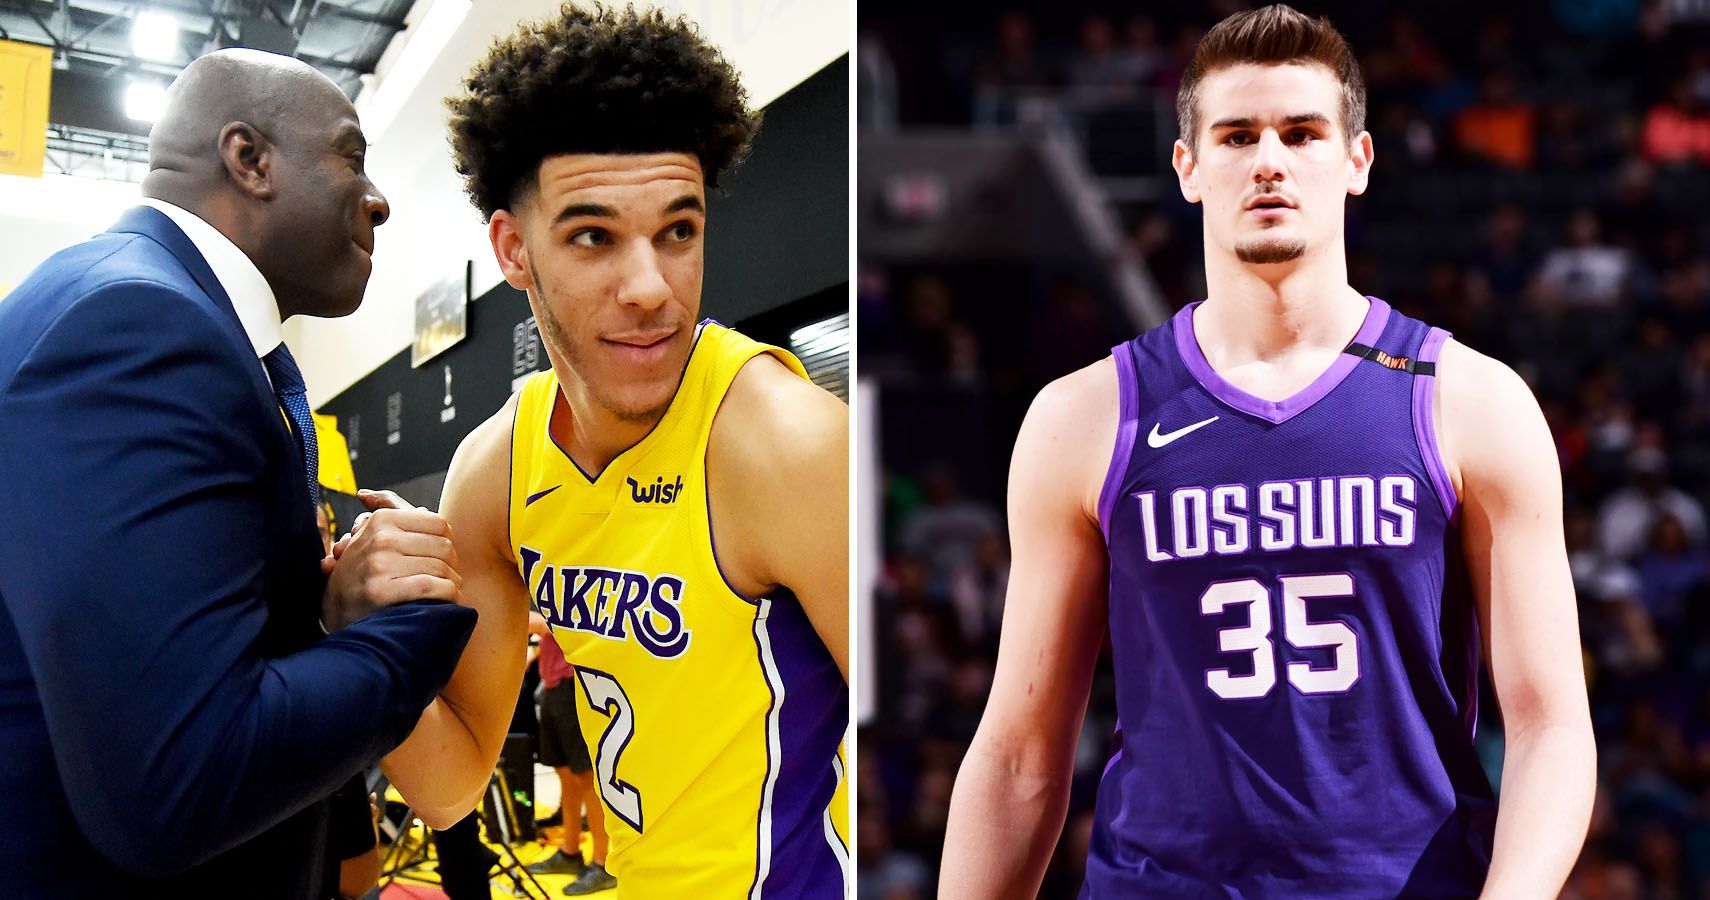 Lonzo Ball still trying to find his footing in NBA